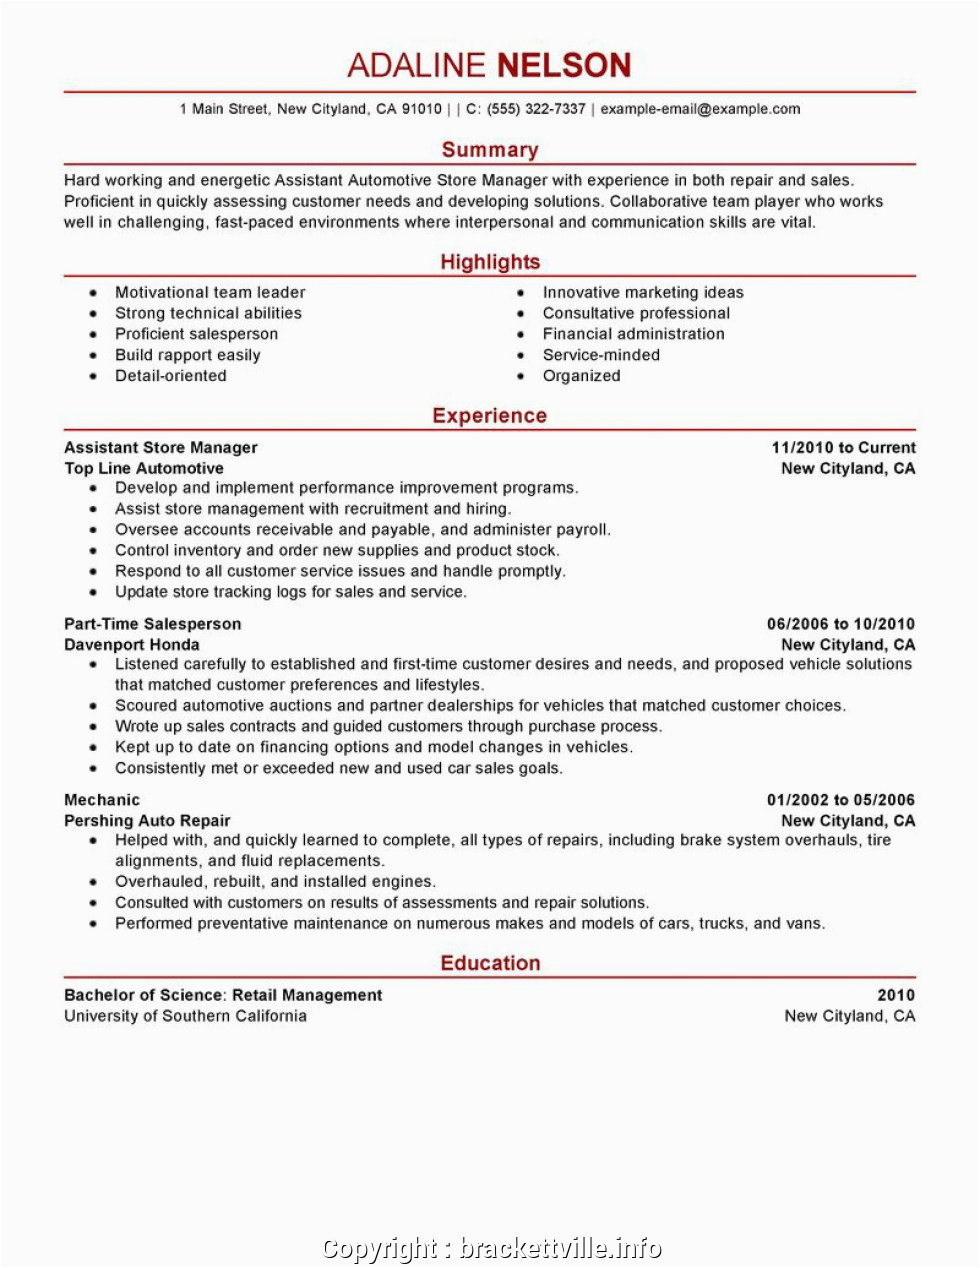 Free Sample Resume Retail Store Manager Best Retail Outlet Manager Resume Retail Resume Template